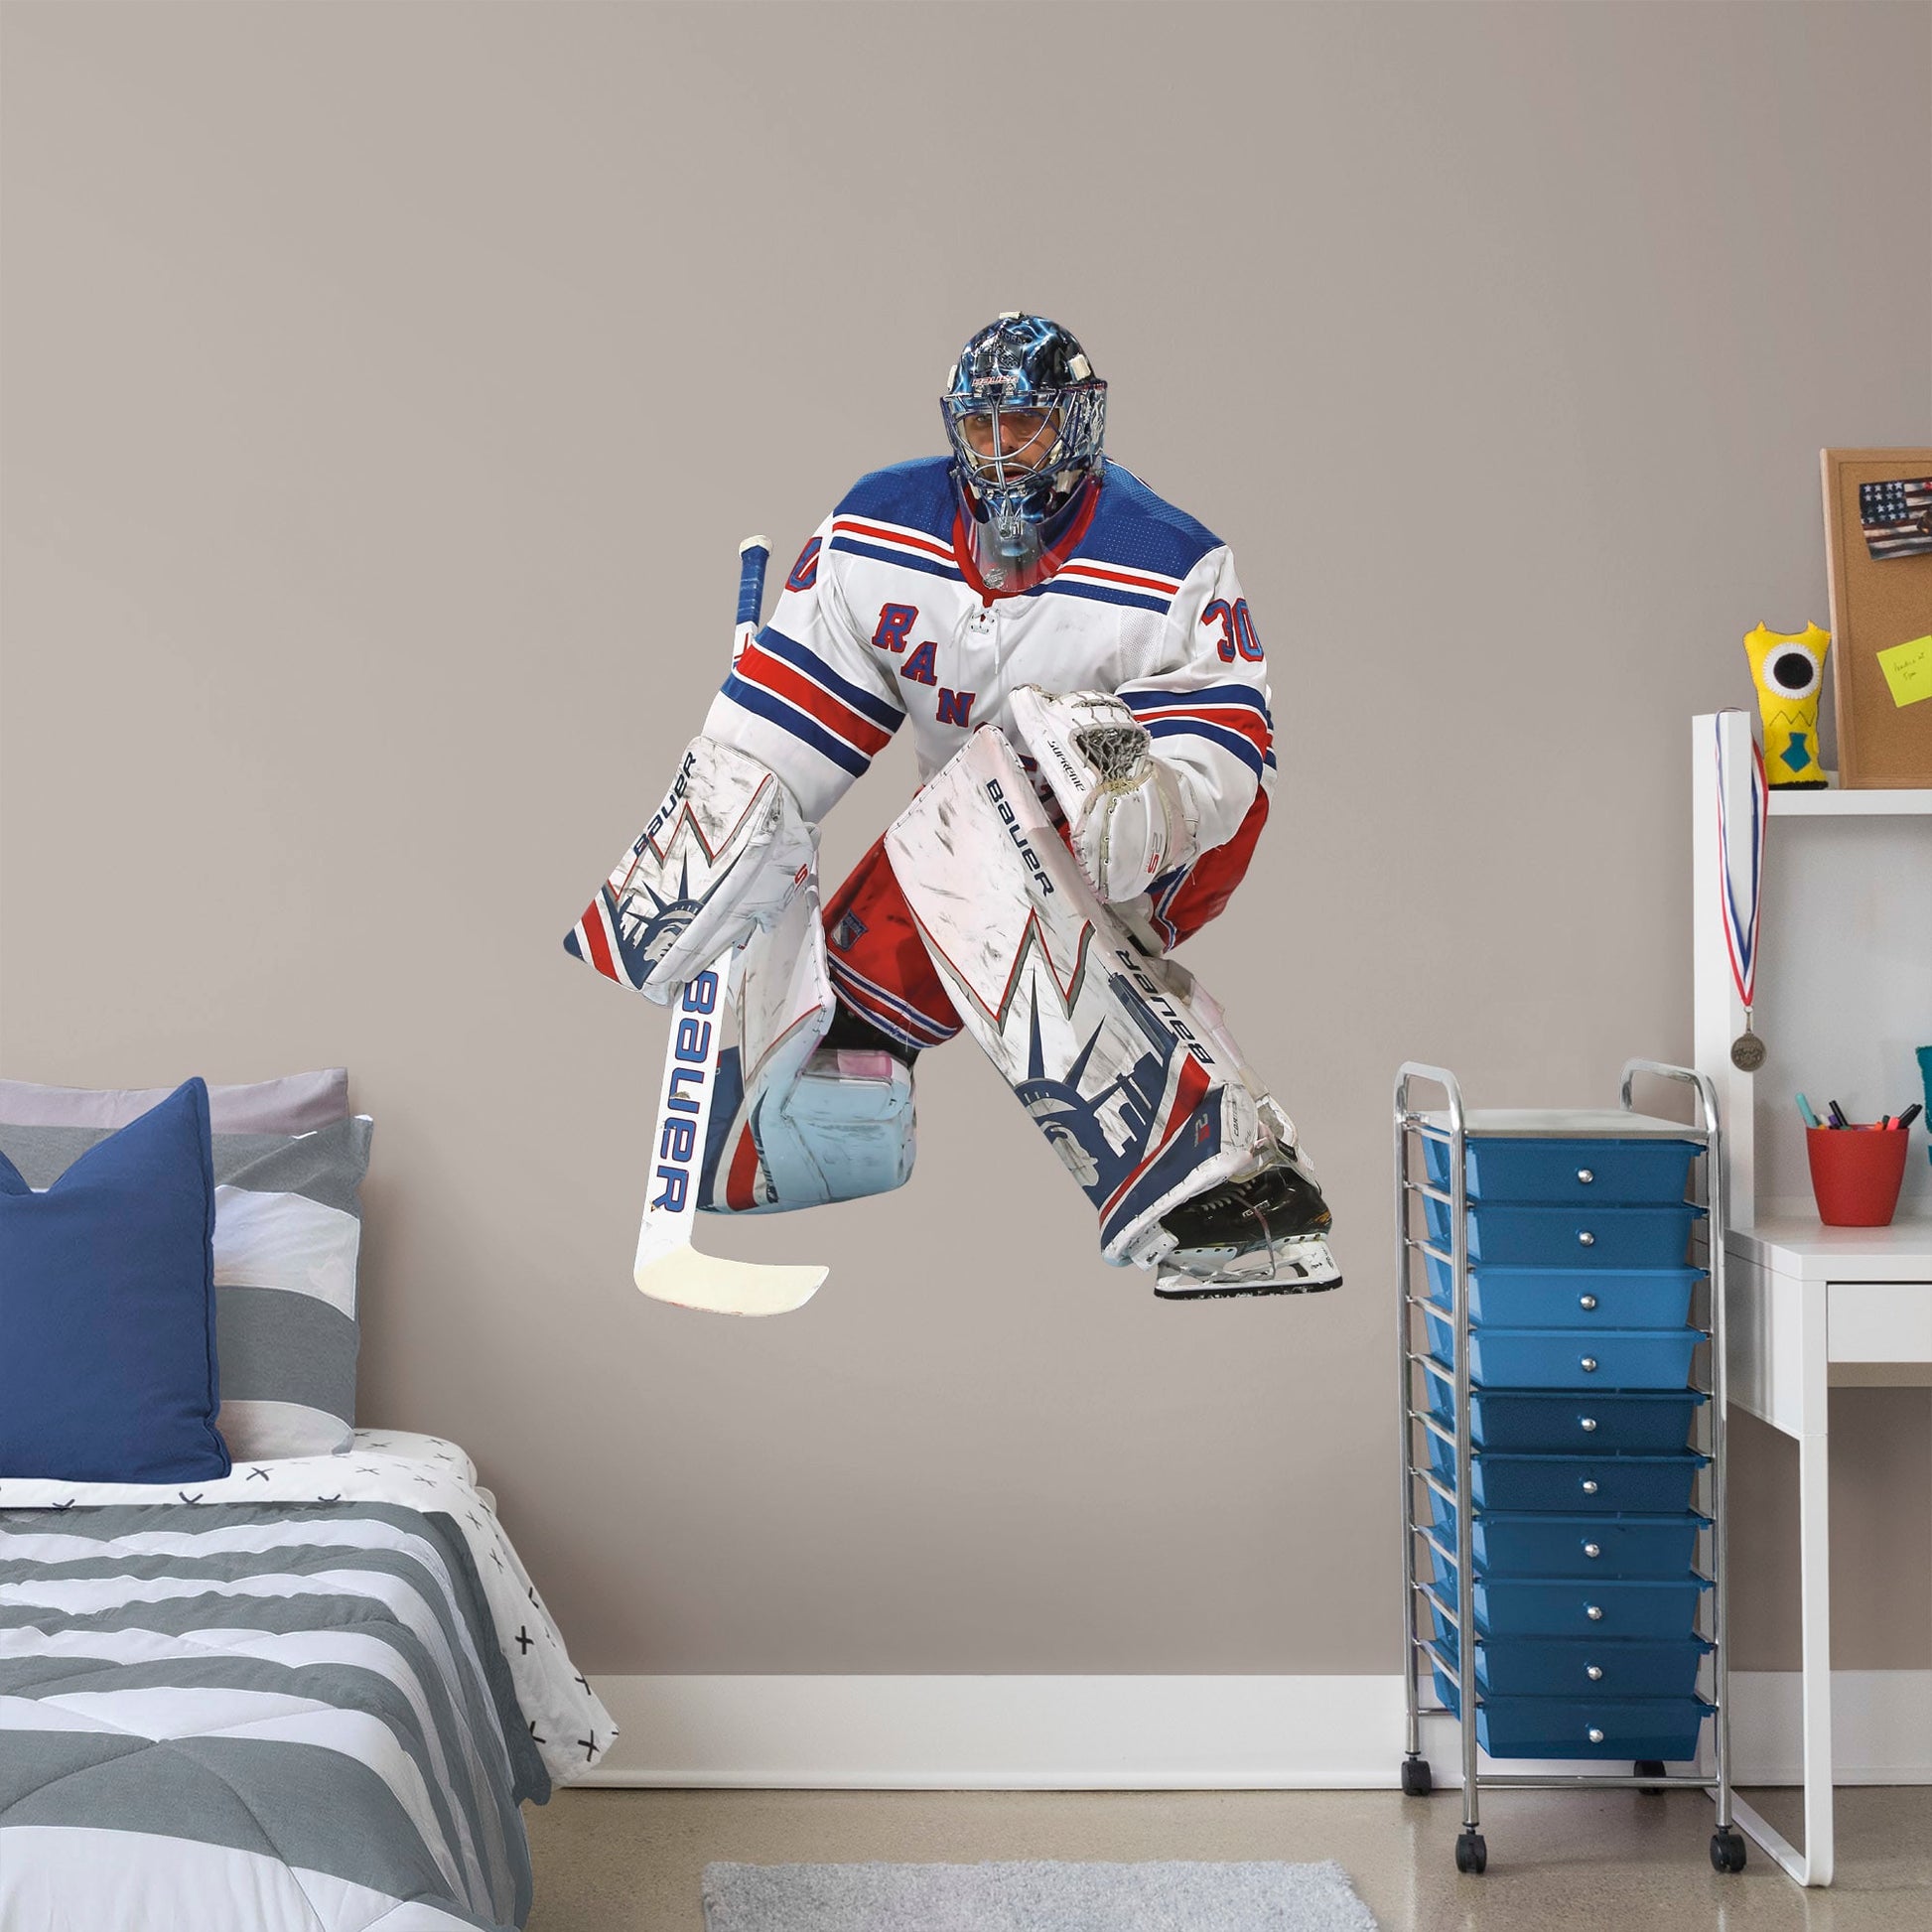 Giant Athlete + 2 Decals (38"W x 50"H) Nothing gets past The King! Celebrate the impressive goaltending career of Henrik Lundqvist with this sturdy removable wall decal set depicting him poised to stop that puck. The gold-medal-winning hockey player looks great on any office or bedroom wall, and, unlike this goalie, the decal can be repositioned over time. It's also a great gift for anyone who appreciates Lundqvist's unique approach to tending goal!